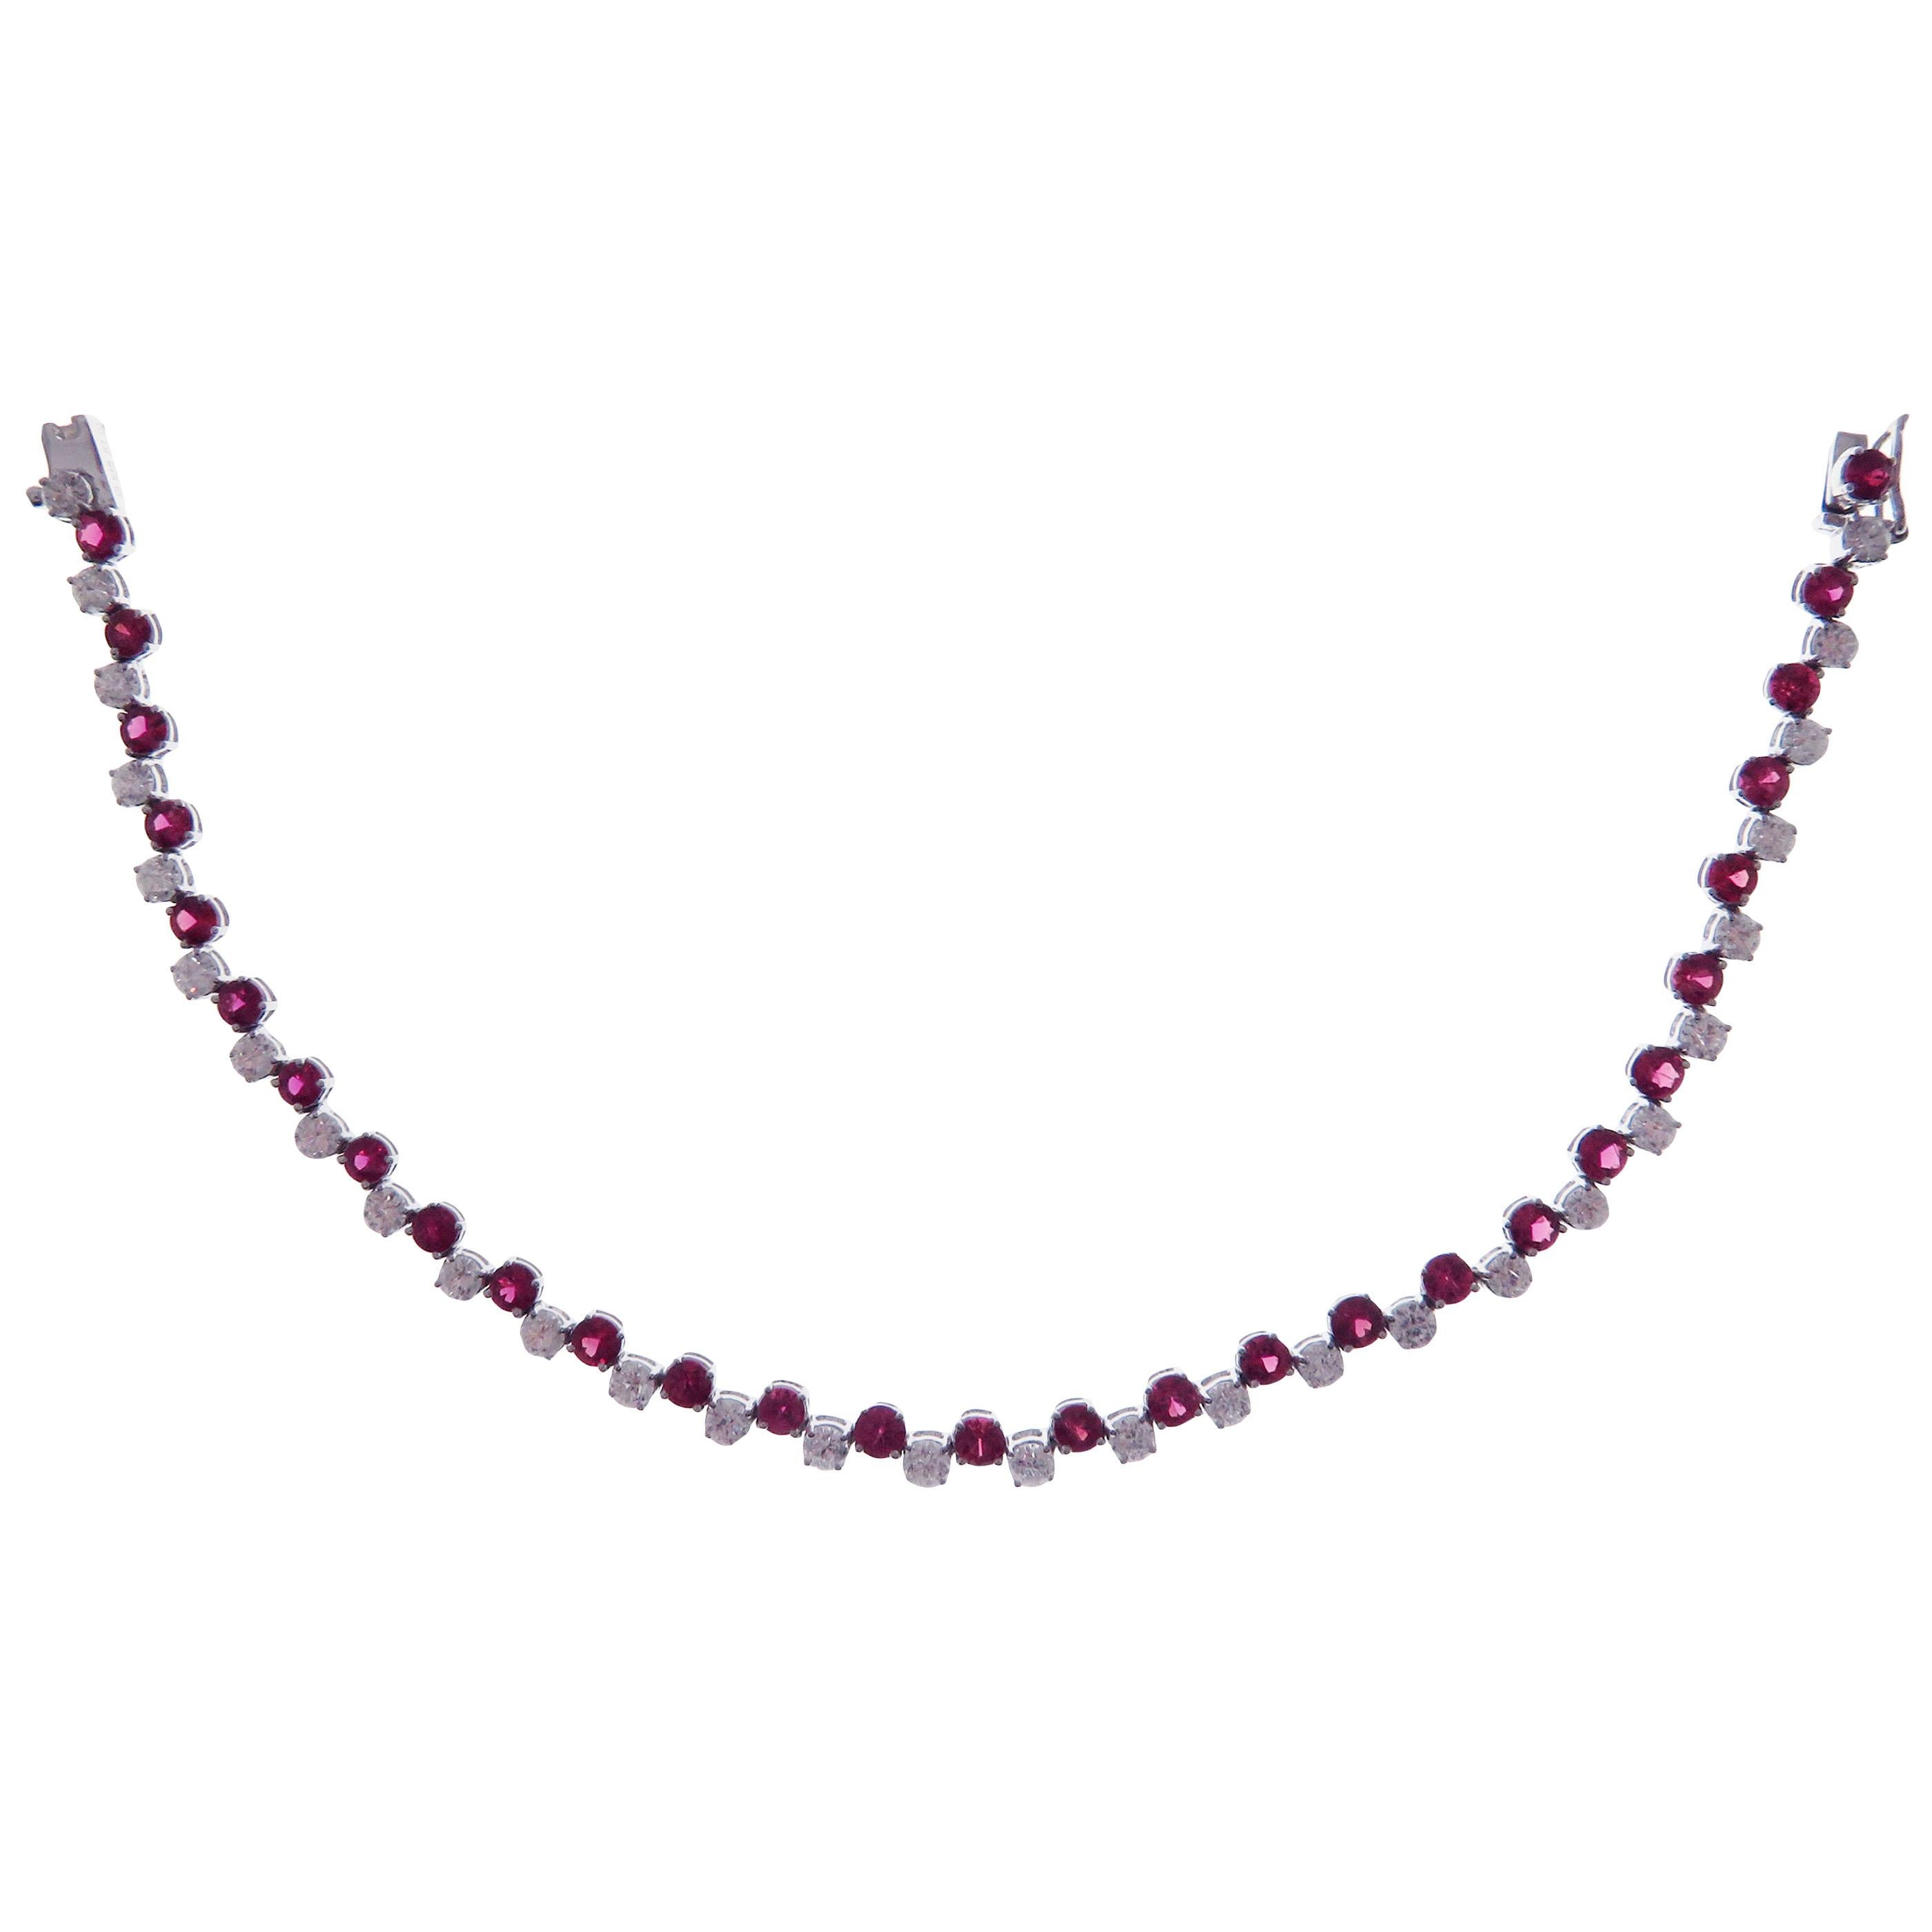 This bracelet is crafted in 18-karat white gold, weighing approximately 2.20 total carats of SI Quality white diamonds and 3.70 total carats of Ruby stones. 

Bracelet is approximately 7